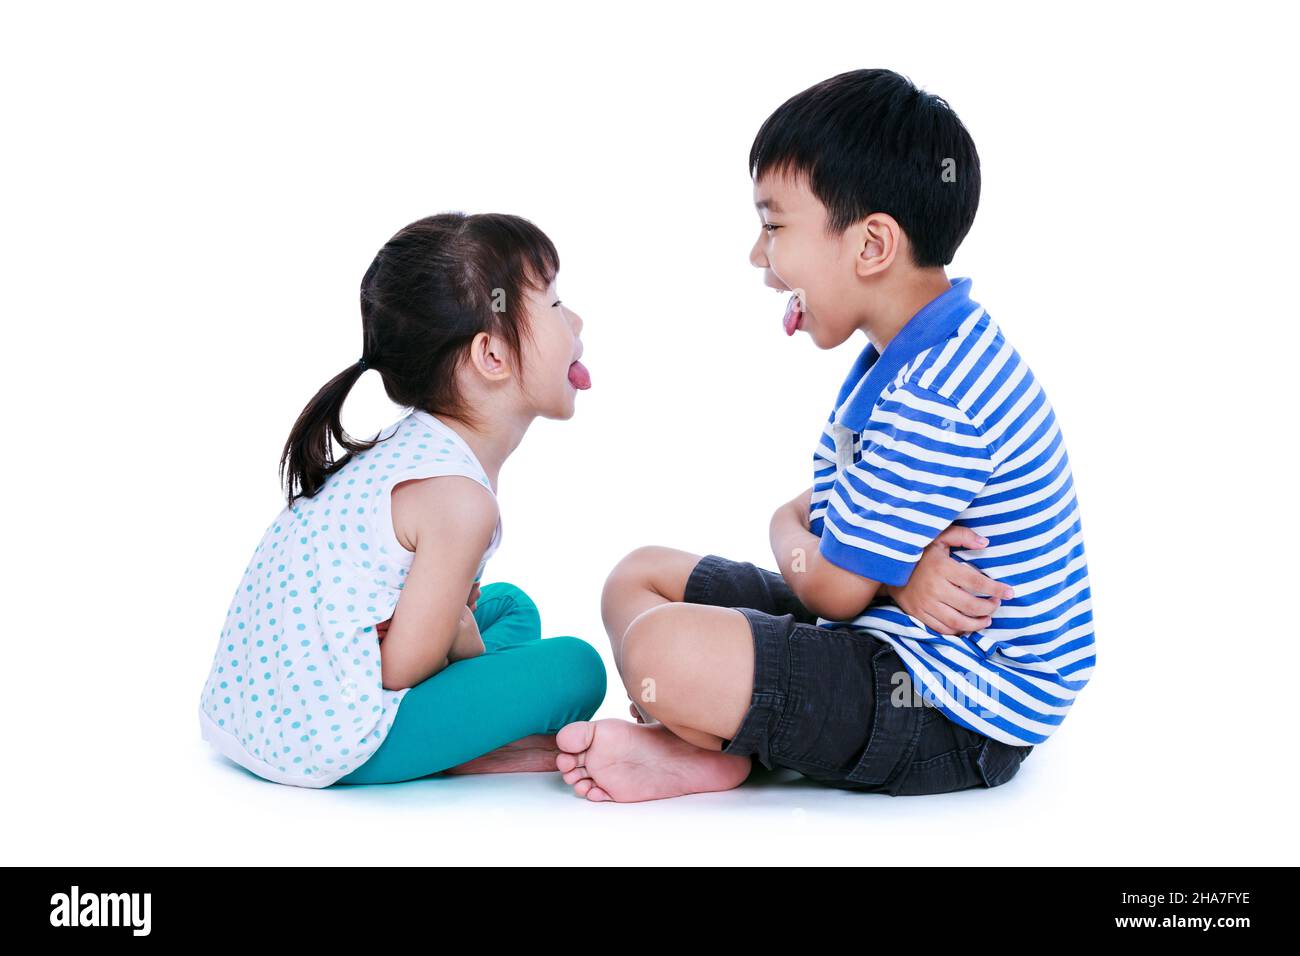 Bad behavior. full body of asian children sticking out tongues and mocking each other. Sister and brother sitting at studio, isolated on white backgro Stock Photo